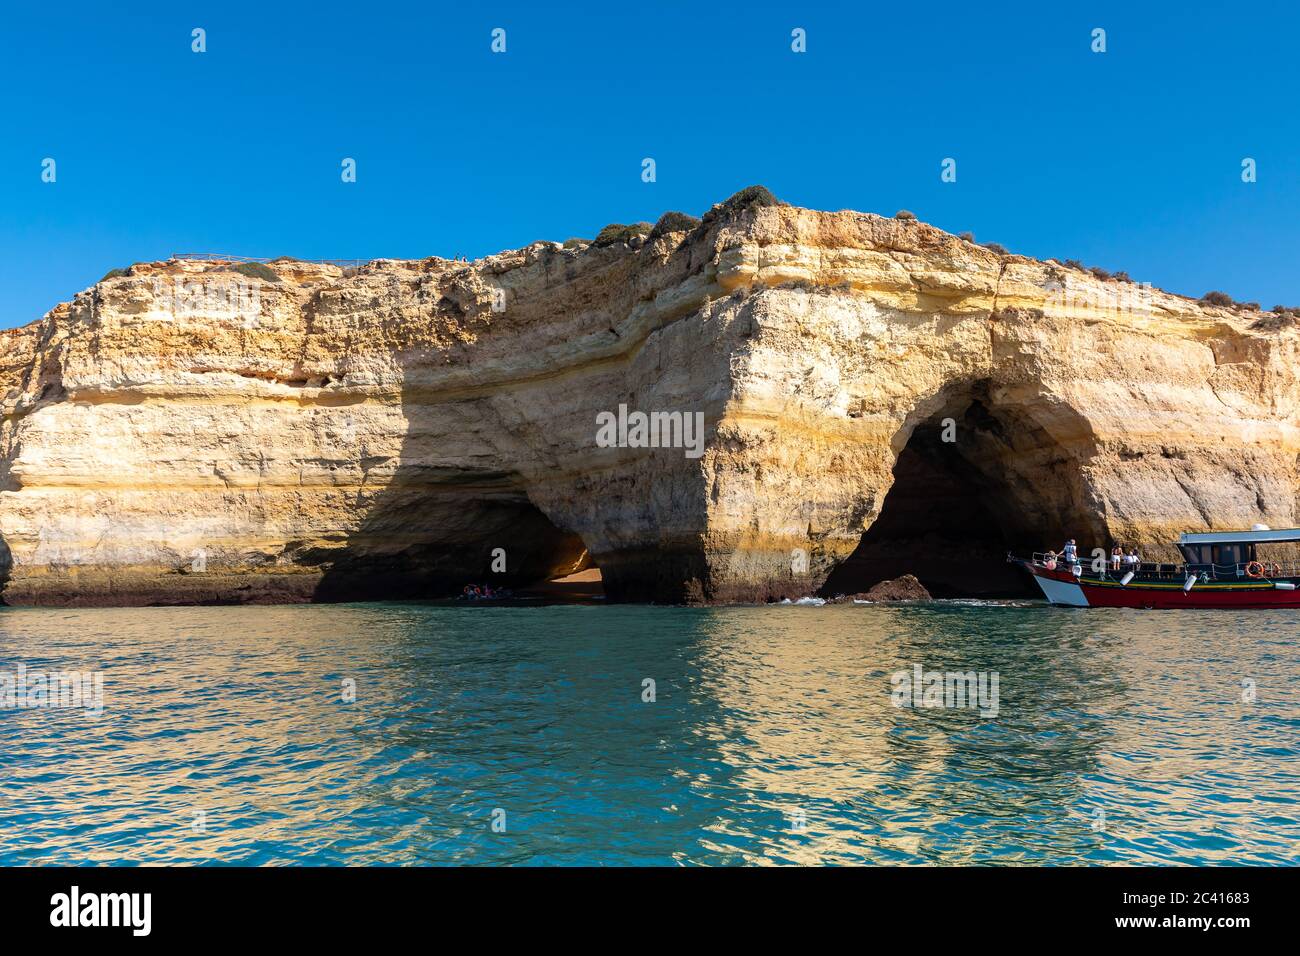 Landscape with the famous Benagil Caves, clear blue sky, sandstone cliffs and tour boat on the Algarve coast in Portugal Stock Photo